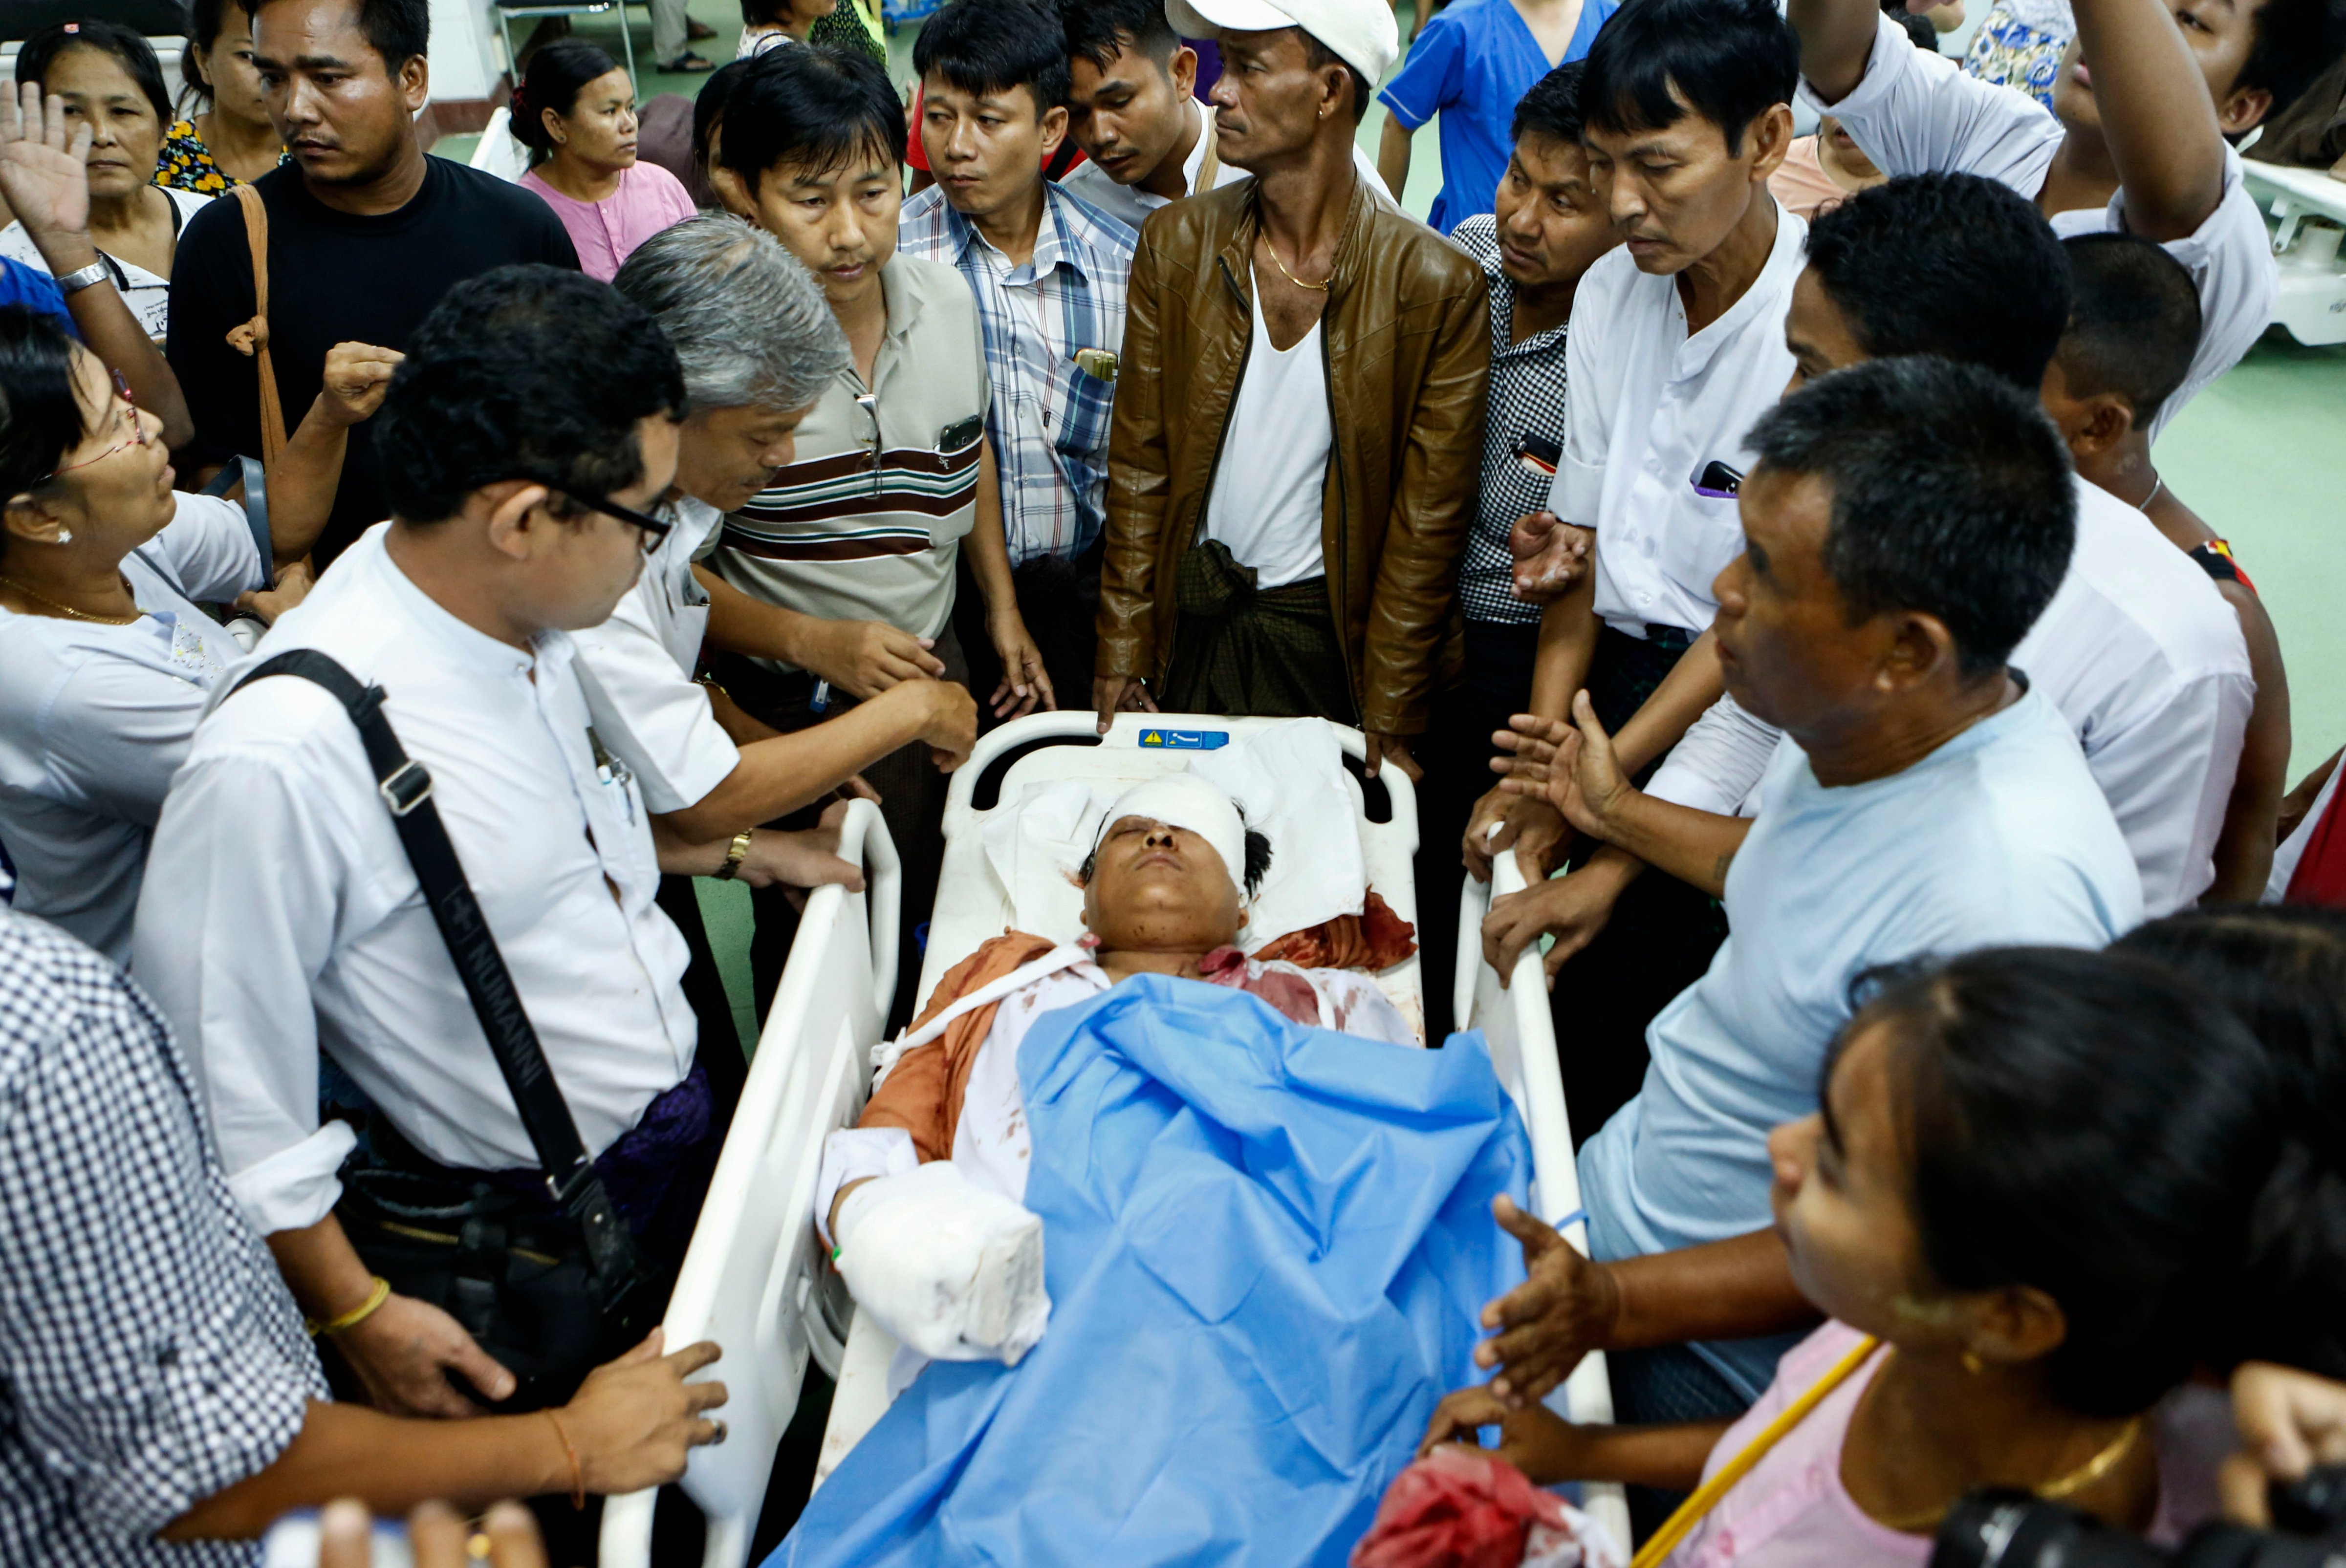 Myanmar opposition party's candidate injured by attack during election campaign